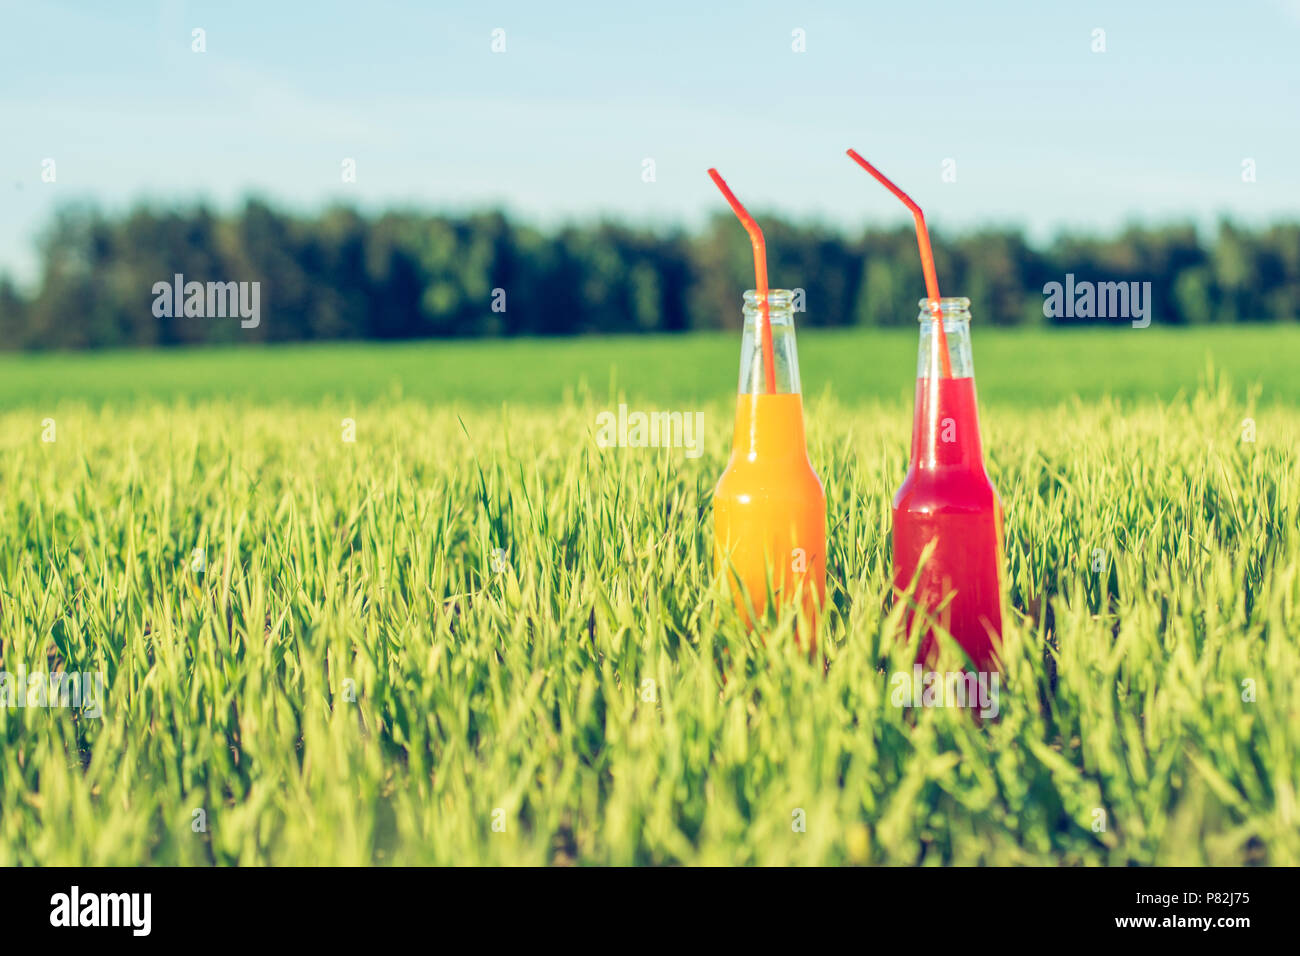 Alcoholic fresh beverage Coctails party red and orange in bottles standing in summer grass with straw Stock Photo